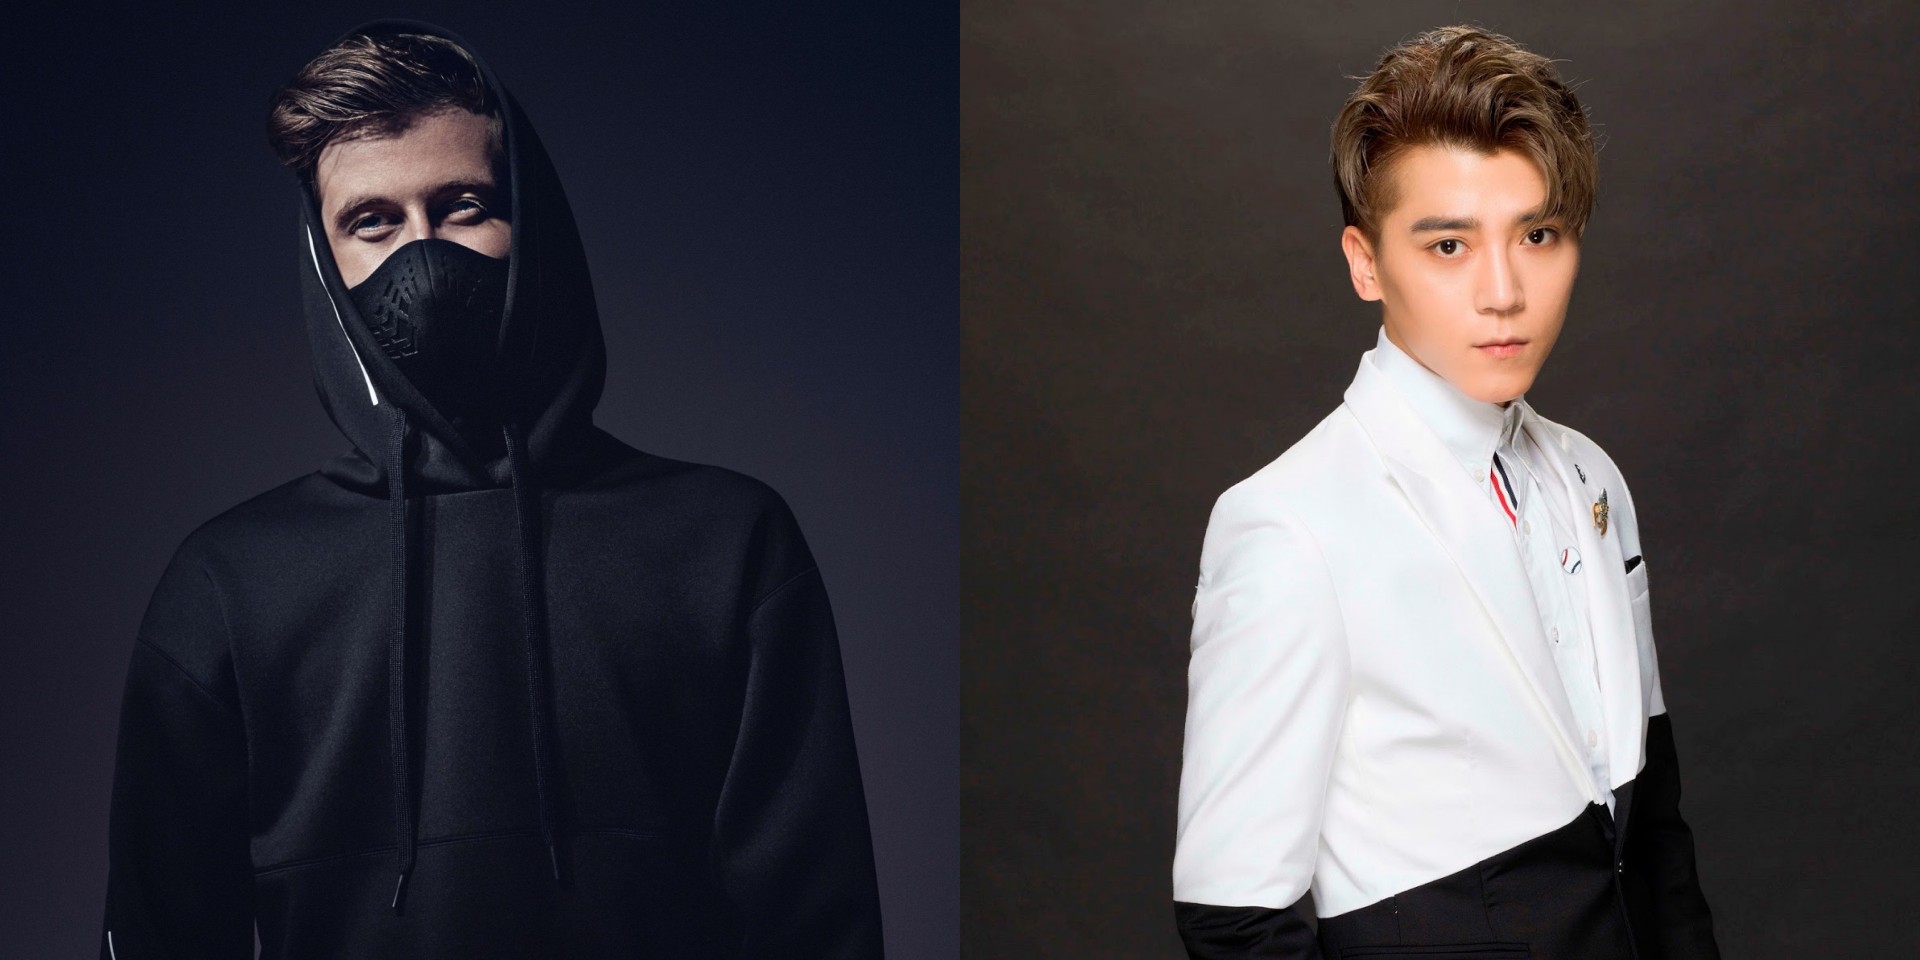 KKBOX announces more acts to perform at KKBOX Music Awards 2019 — Alan Walker, Bii, 831 and Nogizaka46